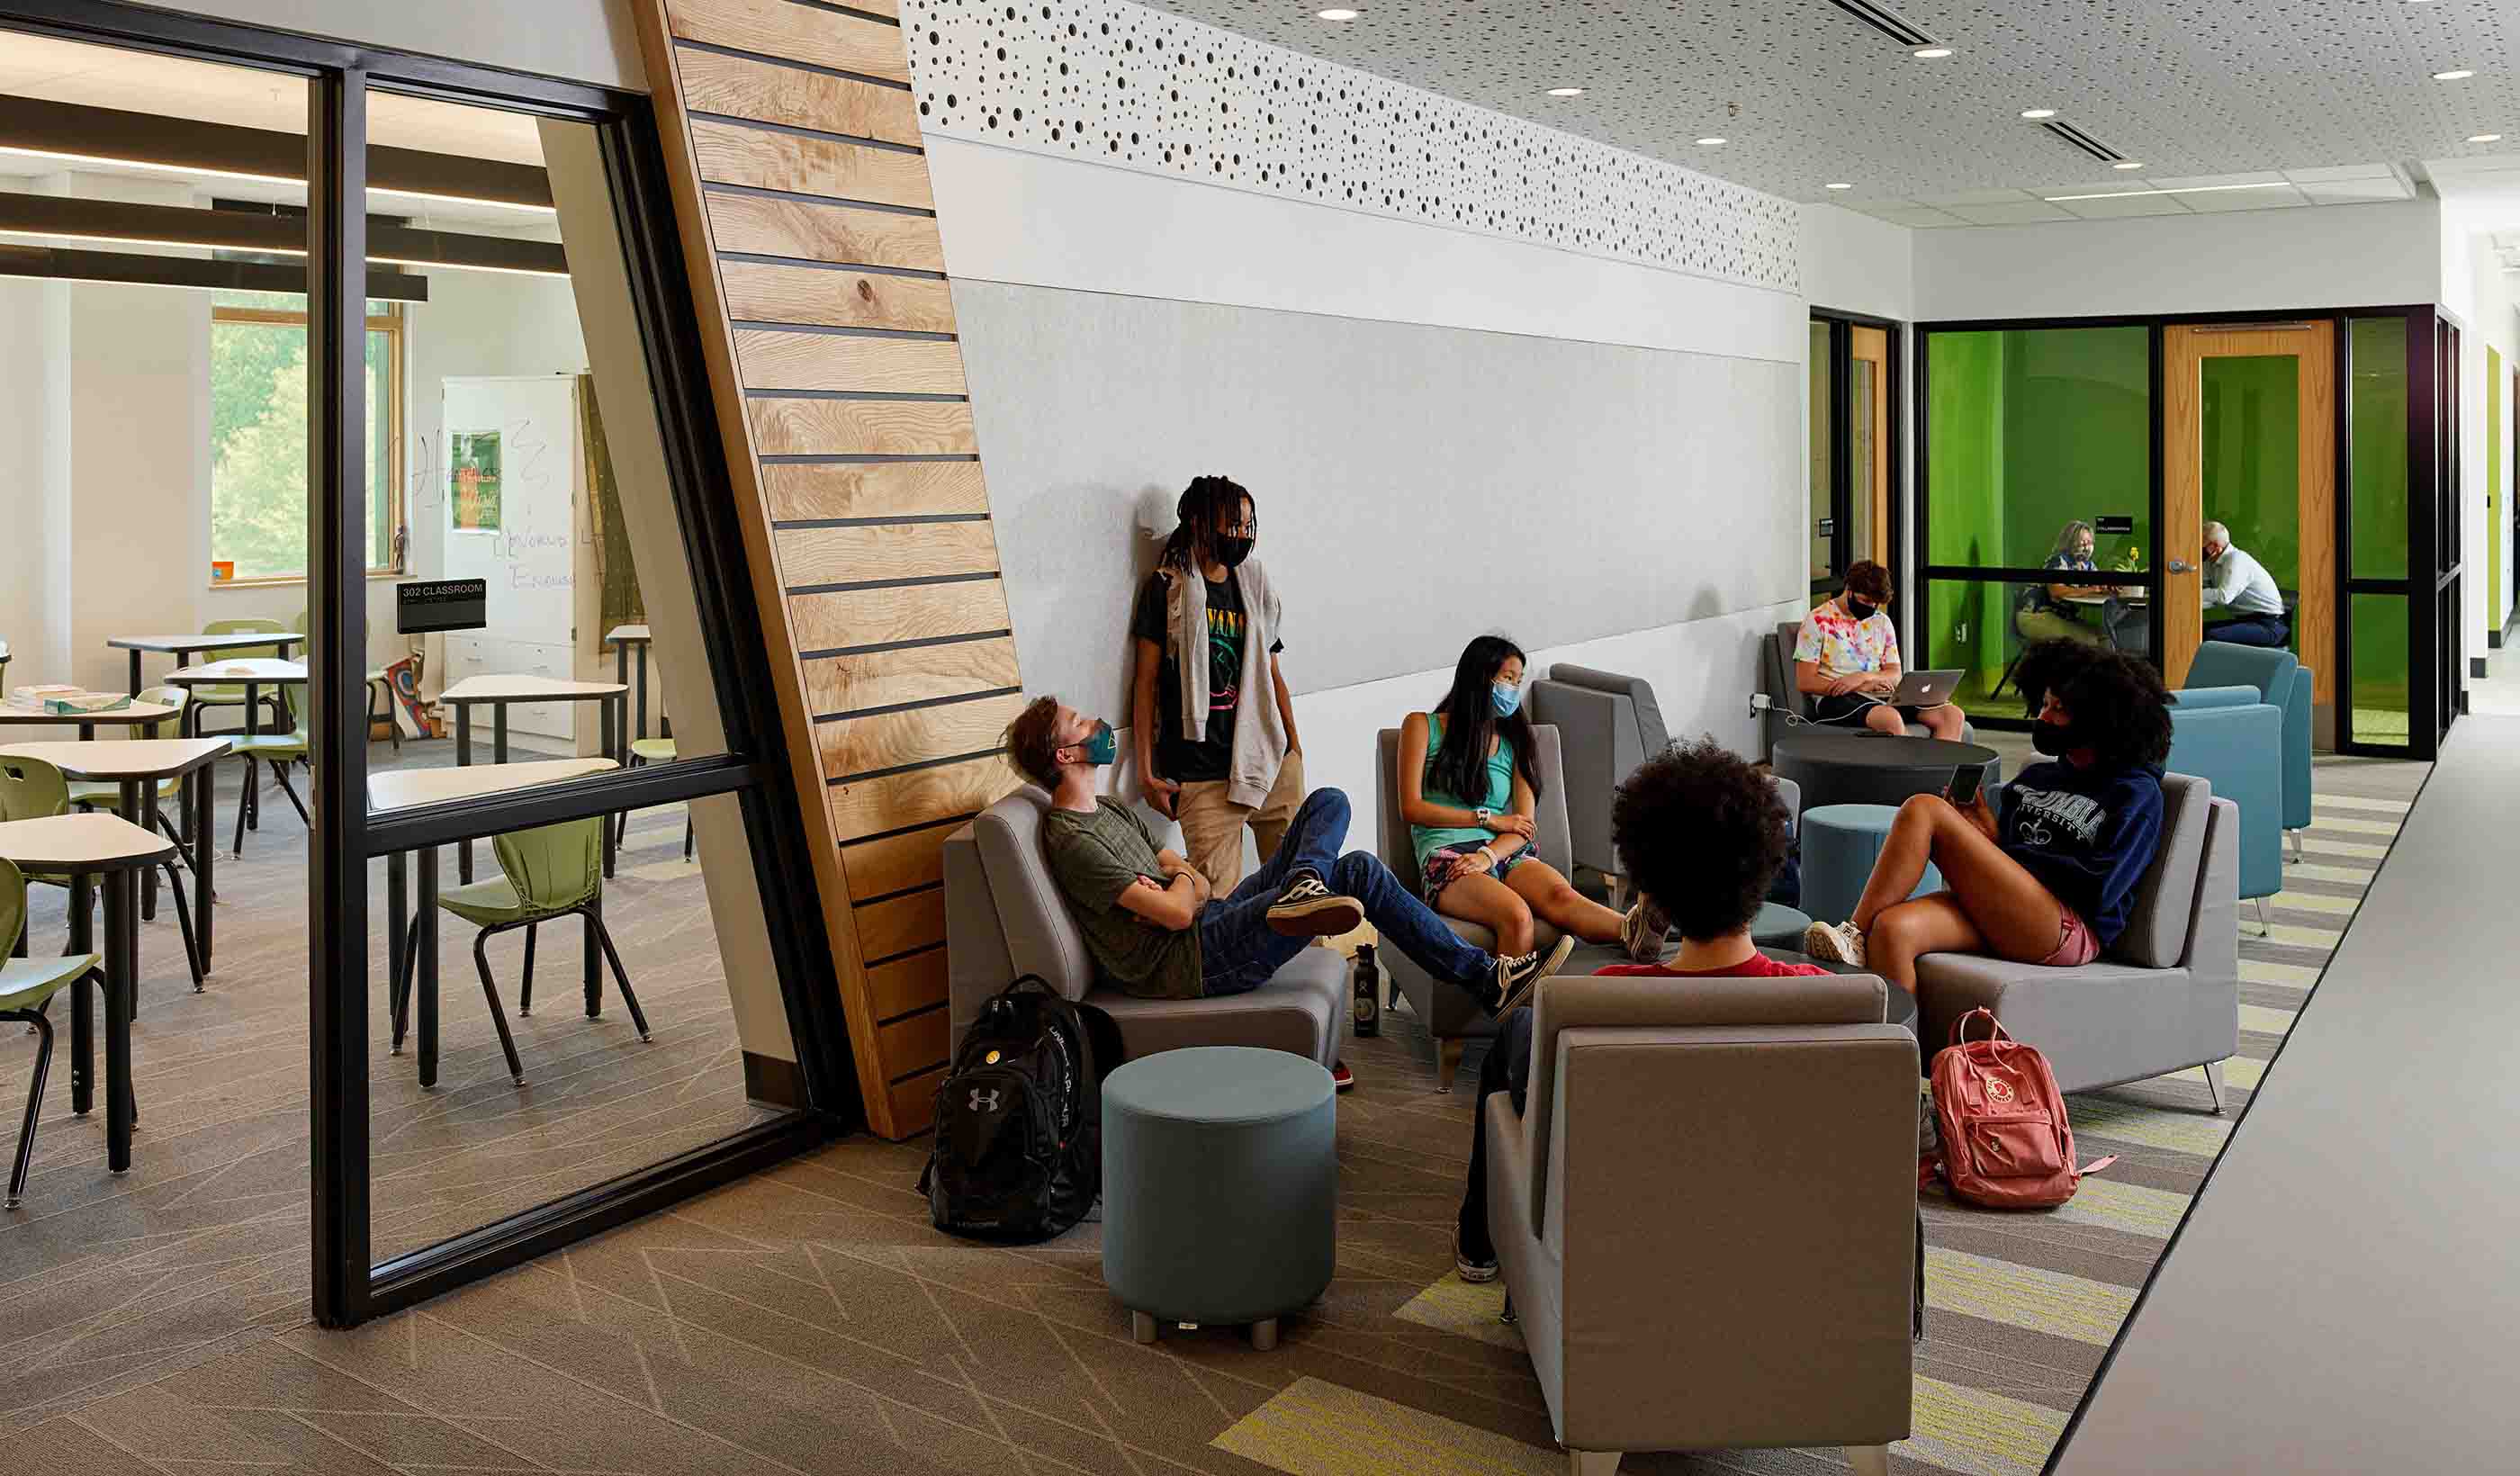 Design inspiration for creating spaces to inspire your students, researchers, and staff